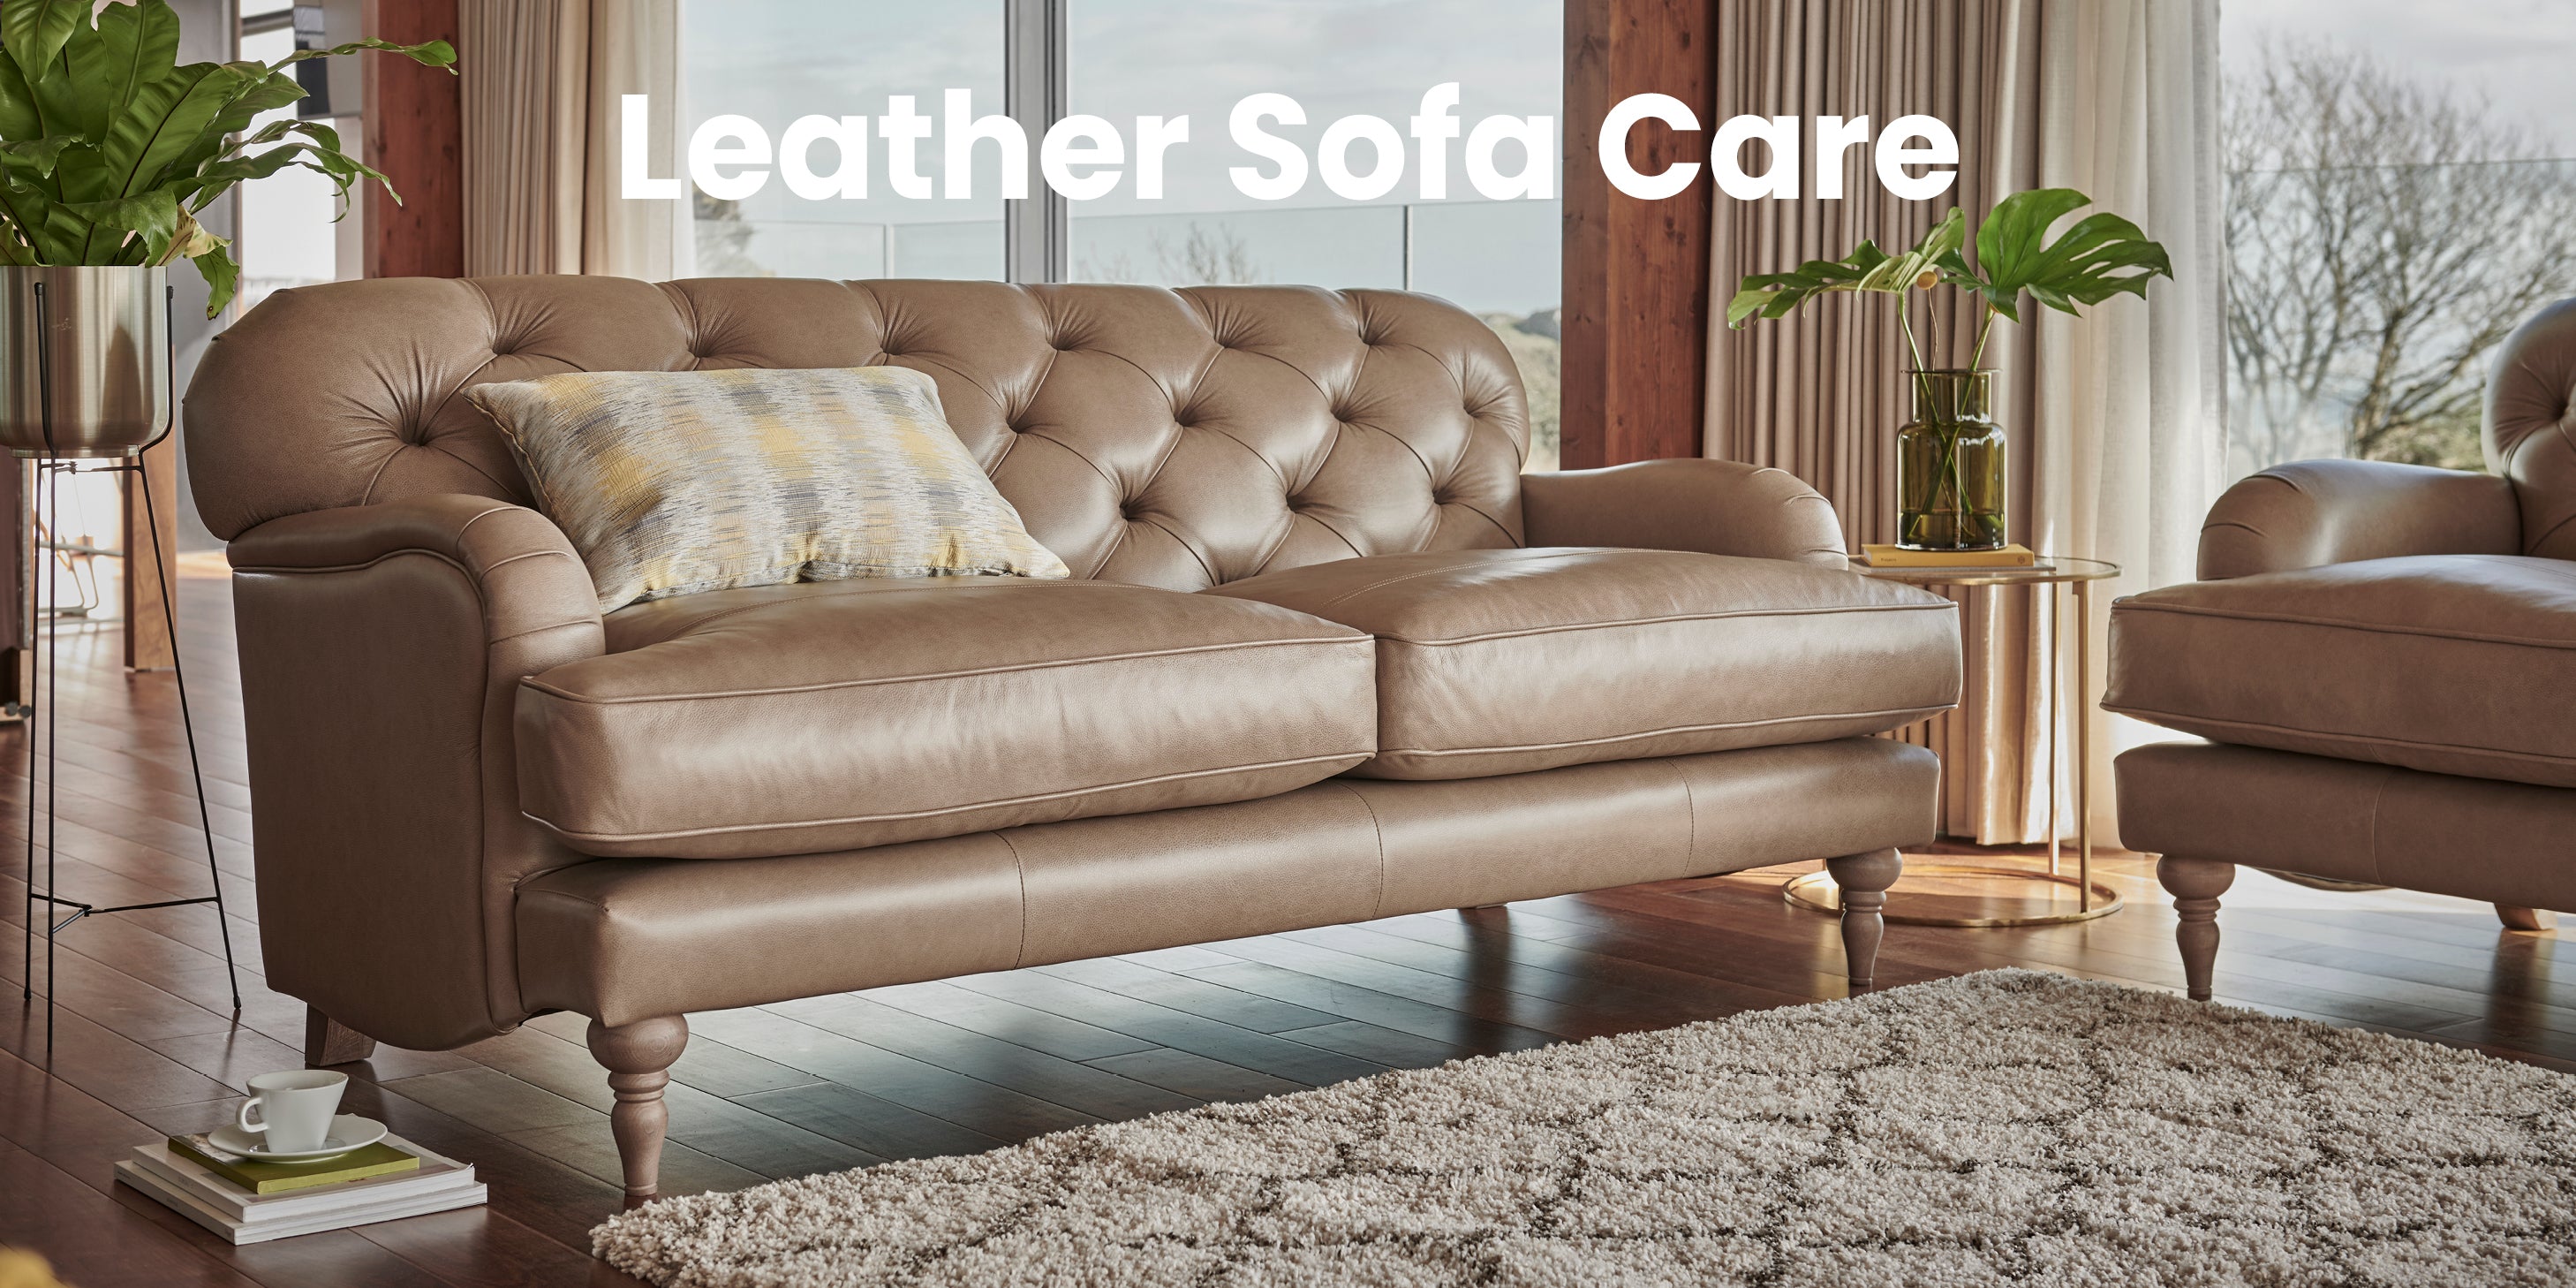 Expert guide on how to clean leather furniture, clothes and accessories